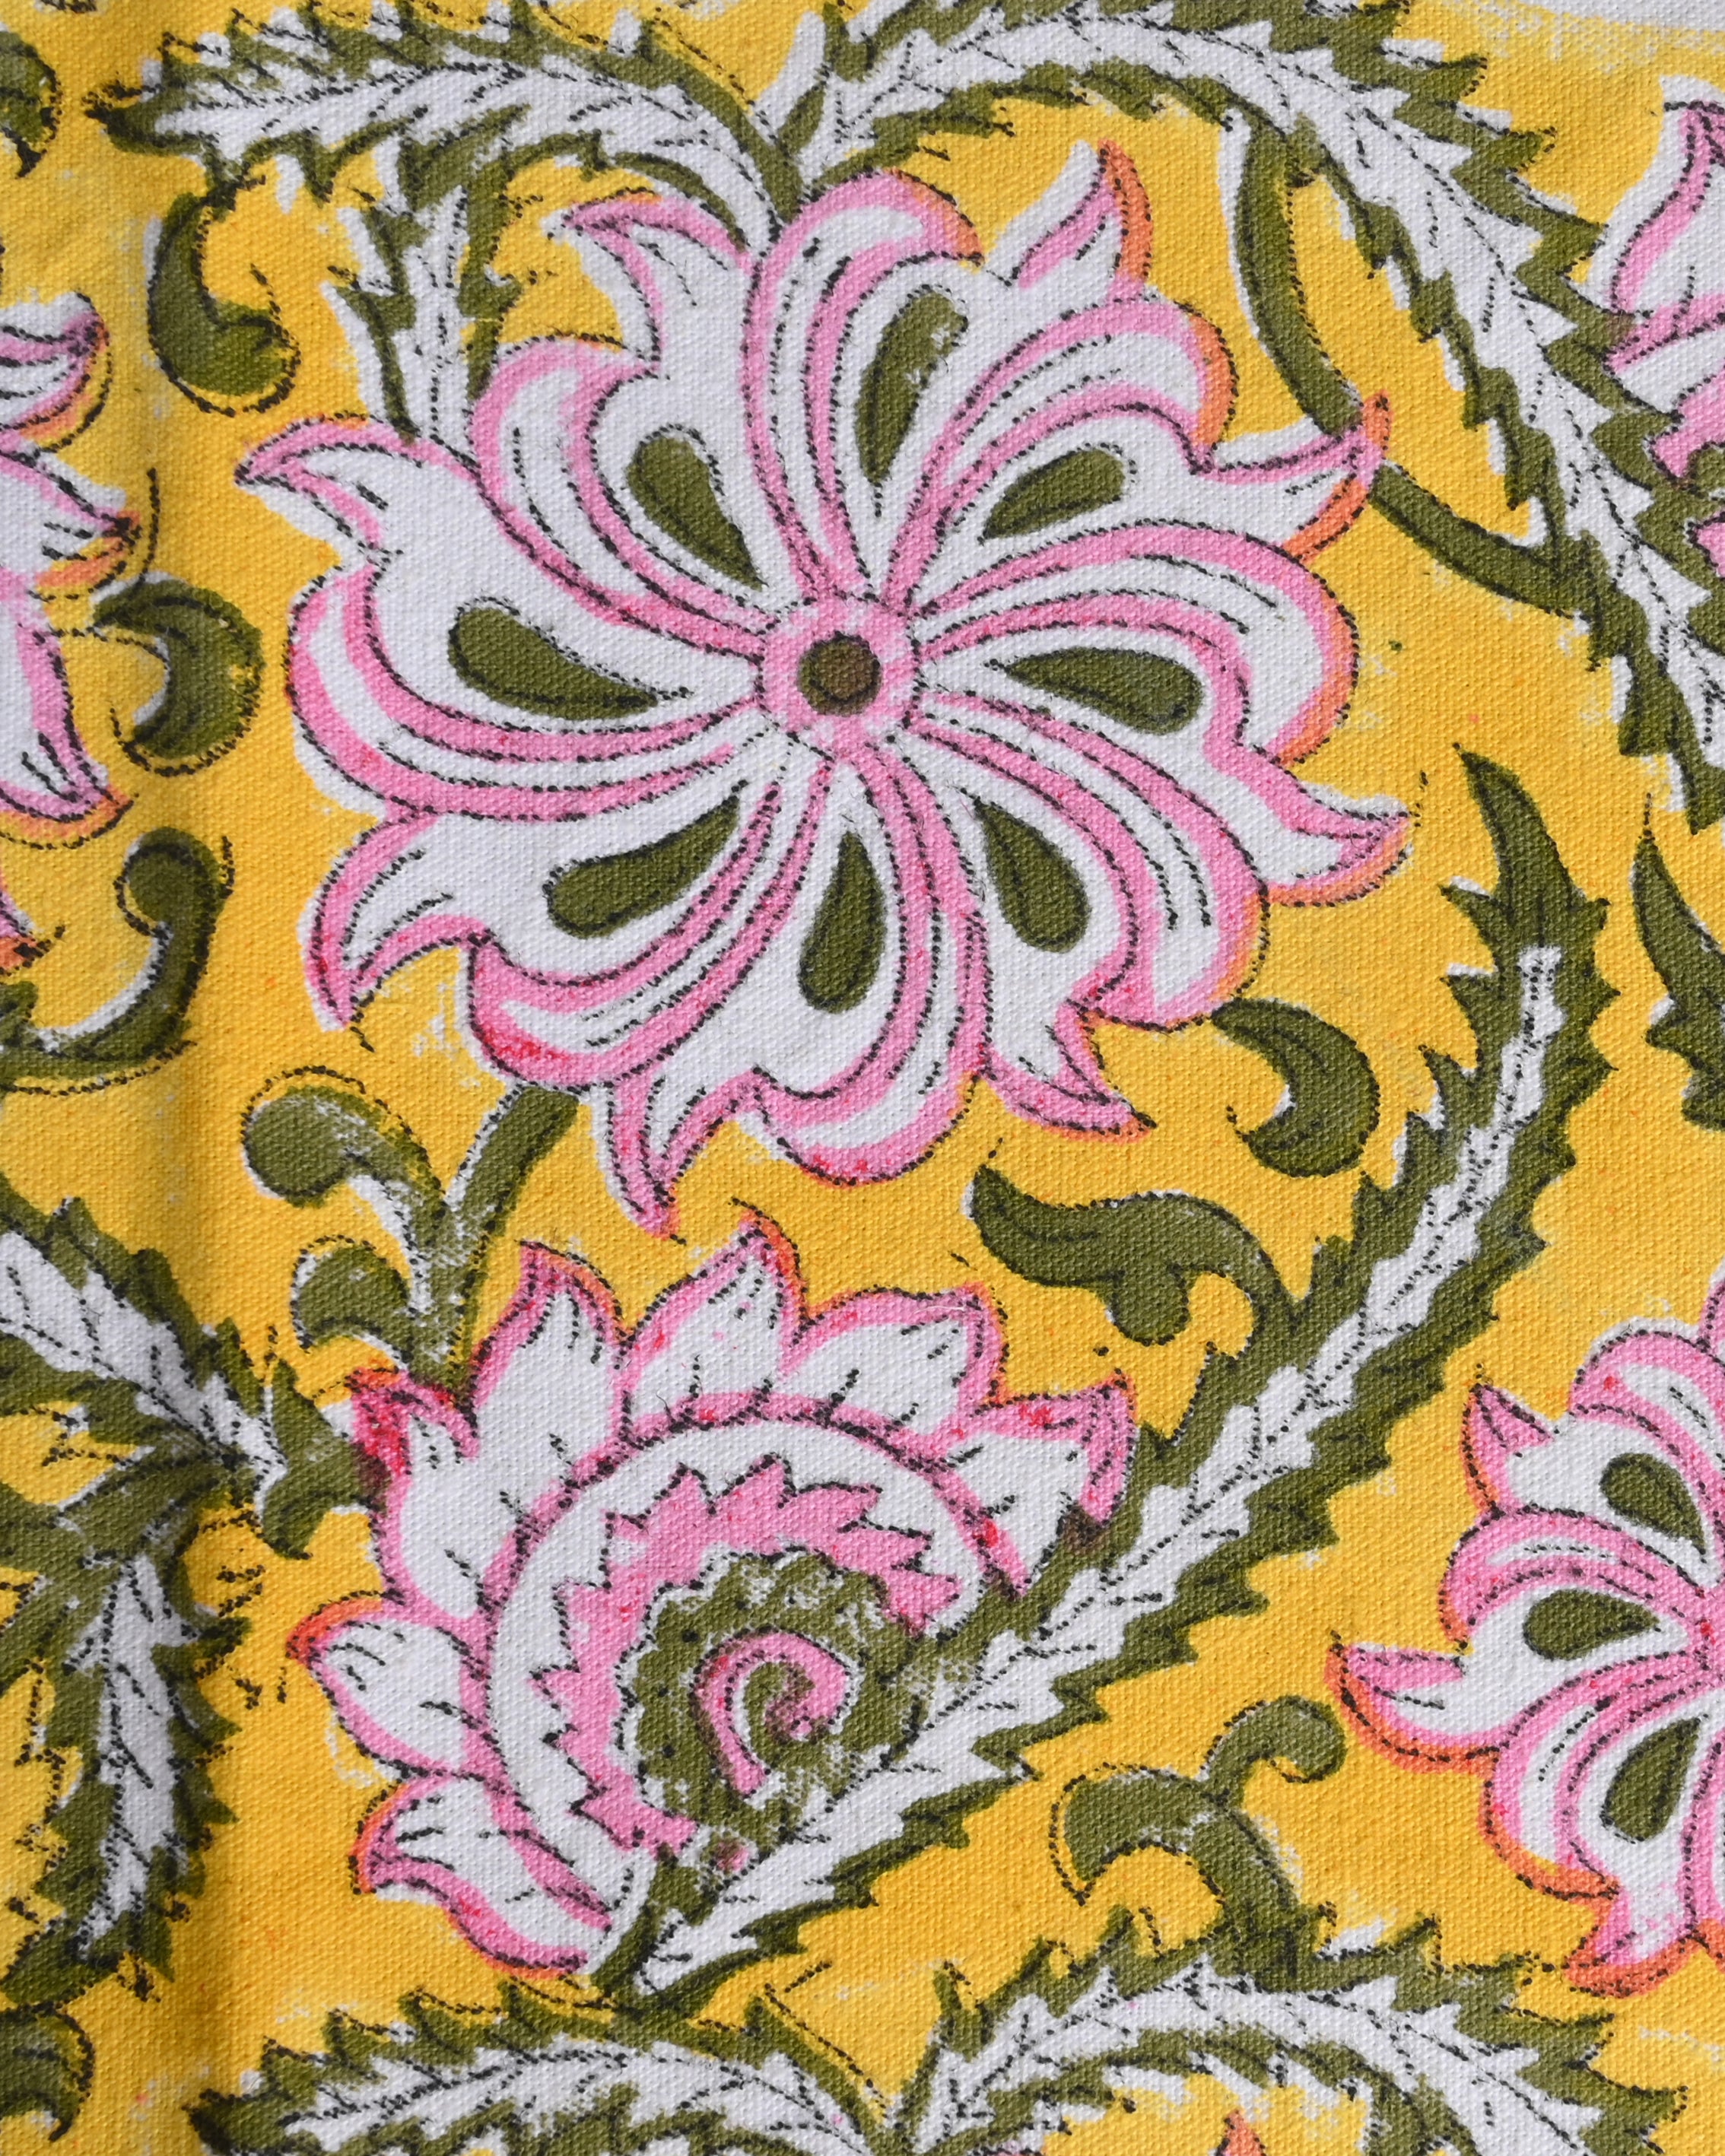 Canvas Table Mat And Napkin Pink-Mustard Floral Jaal Block Print